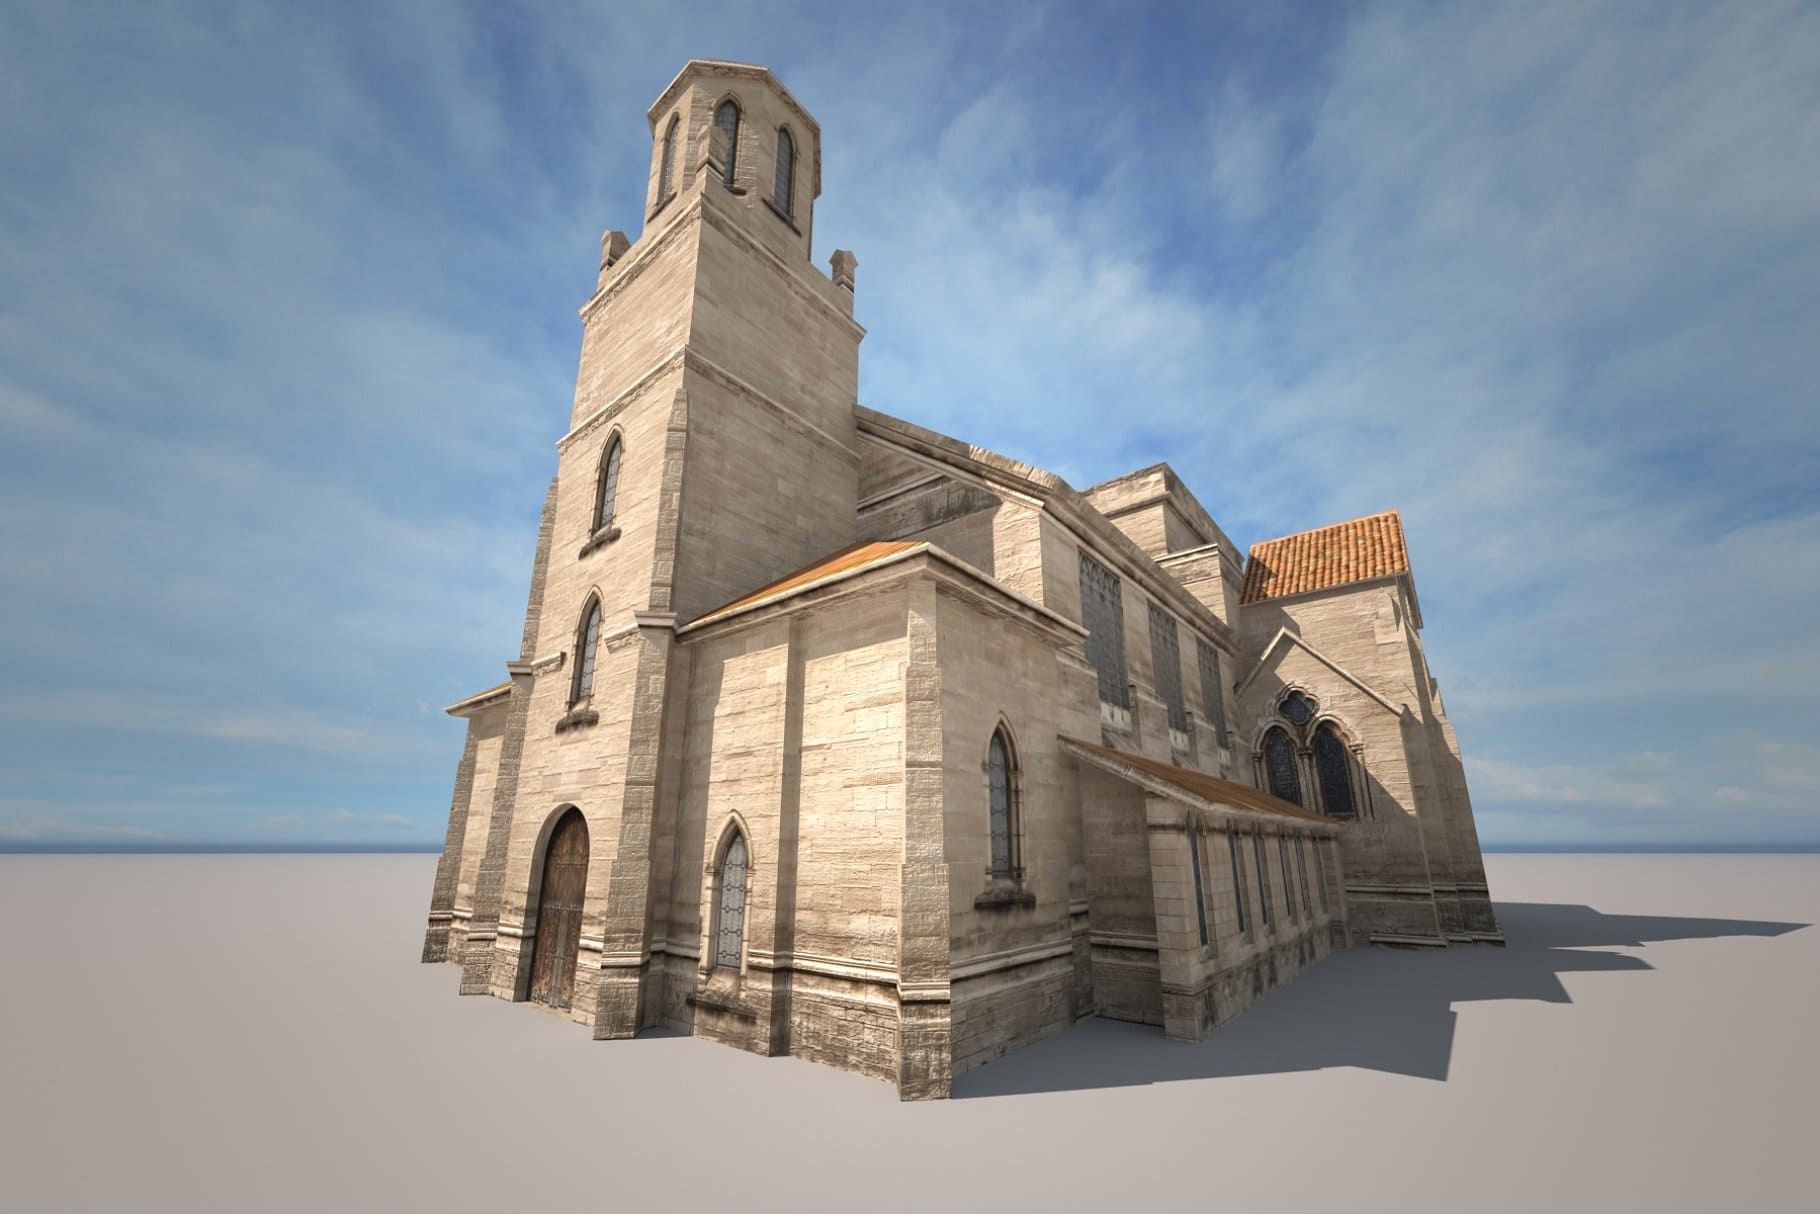 3D model of a church building with Gothic windows.